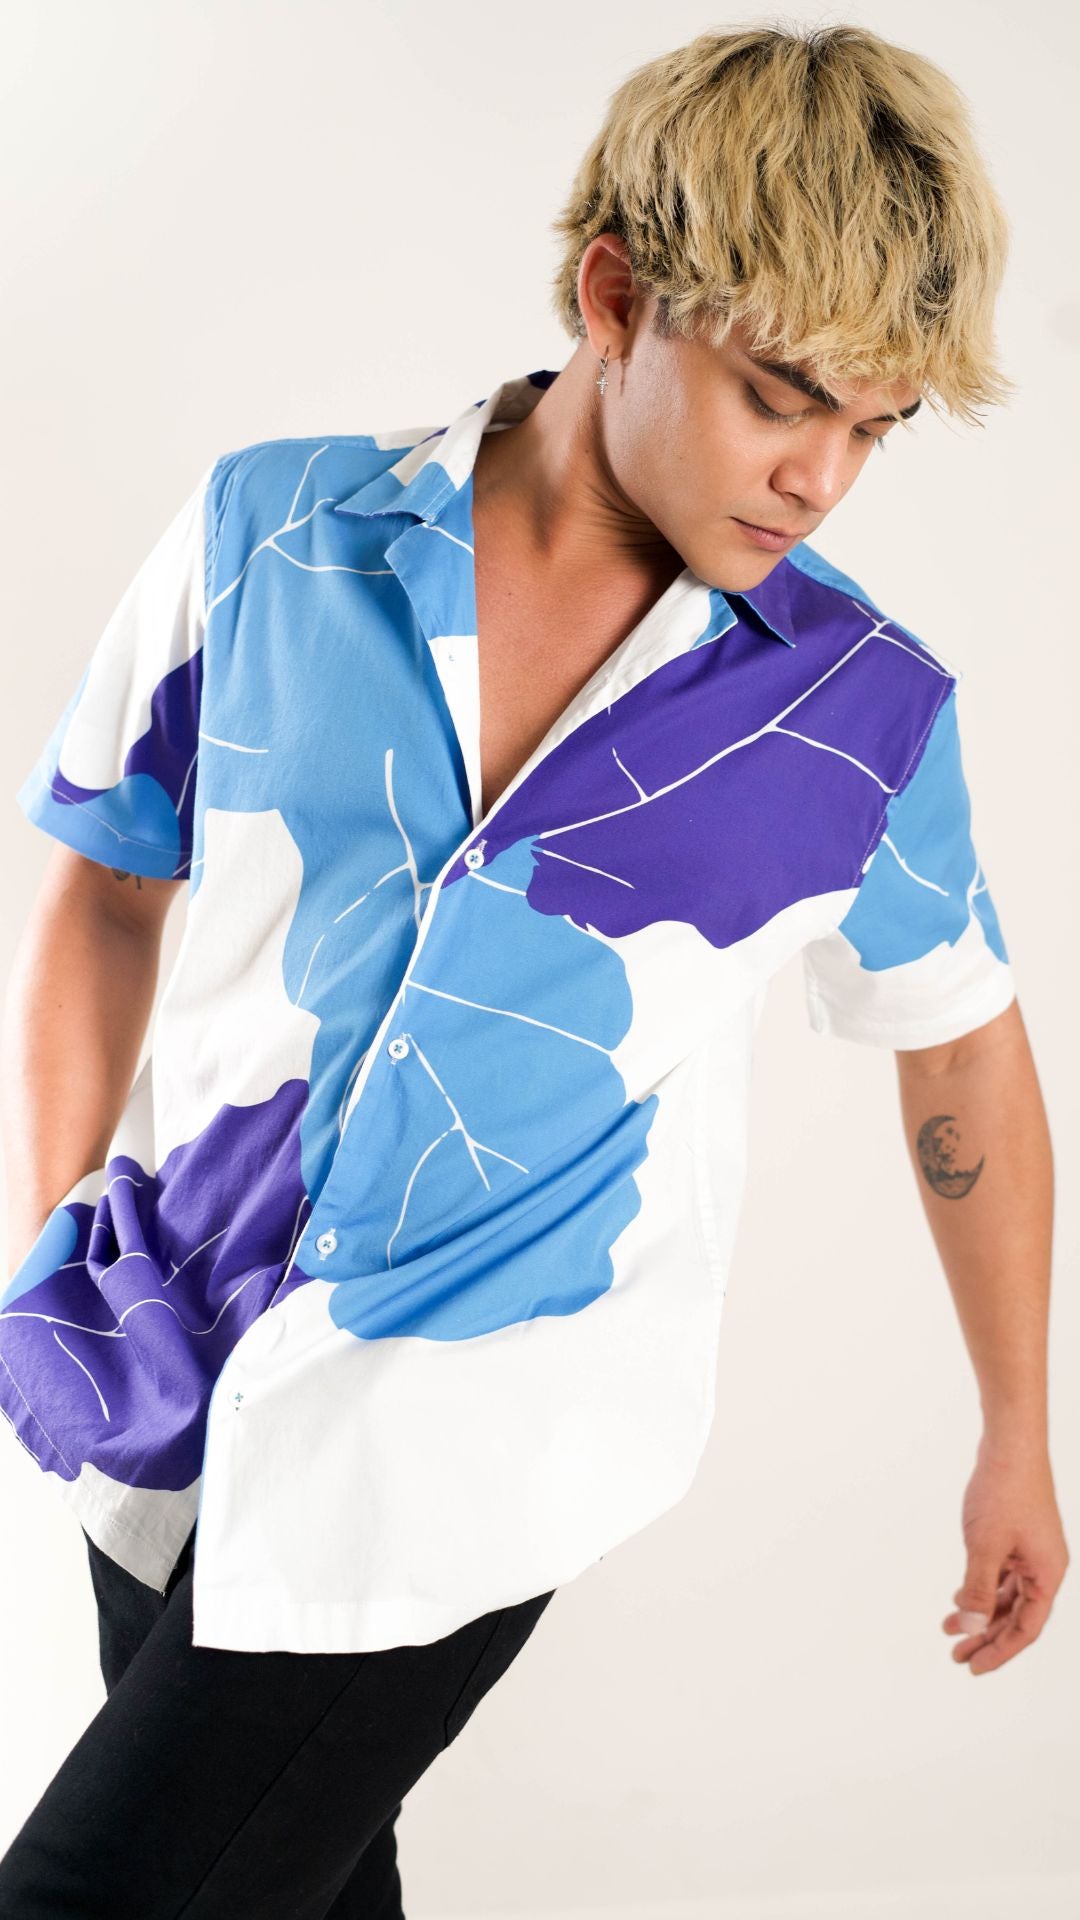 Men's Relaxed Fit Short Sleeves Multi Blue Spread Shirt